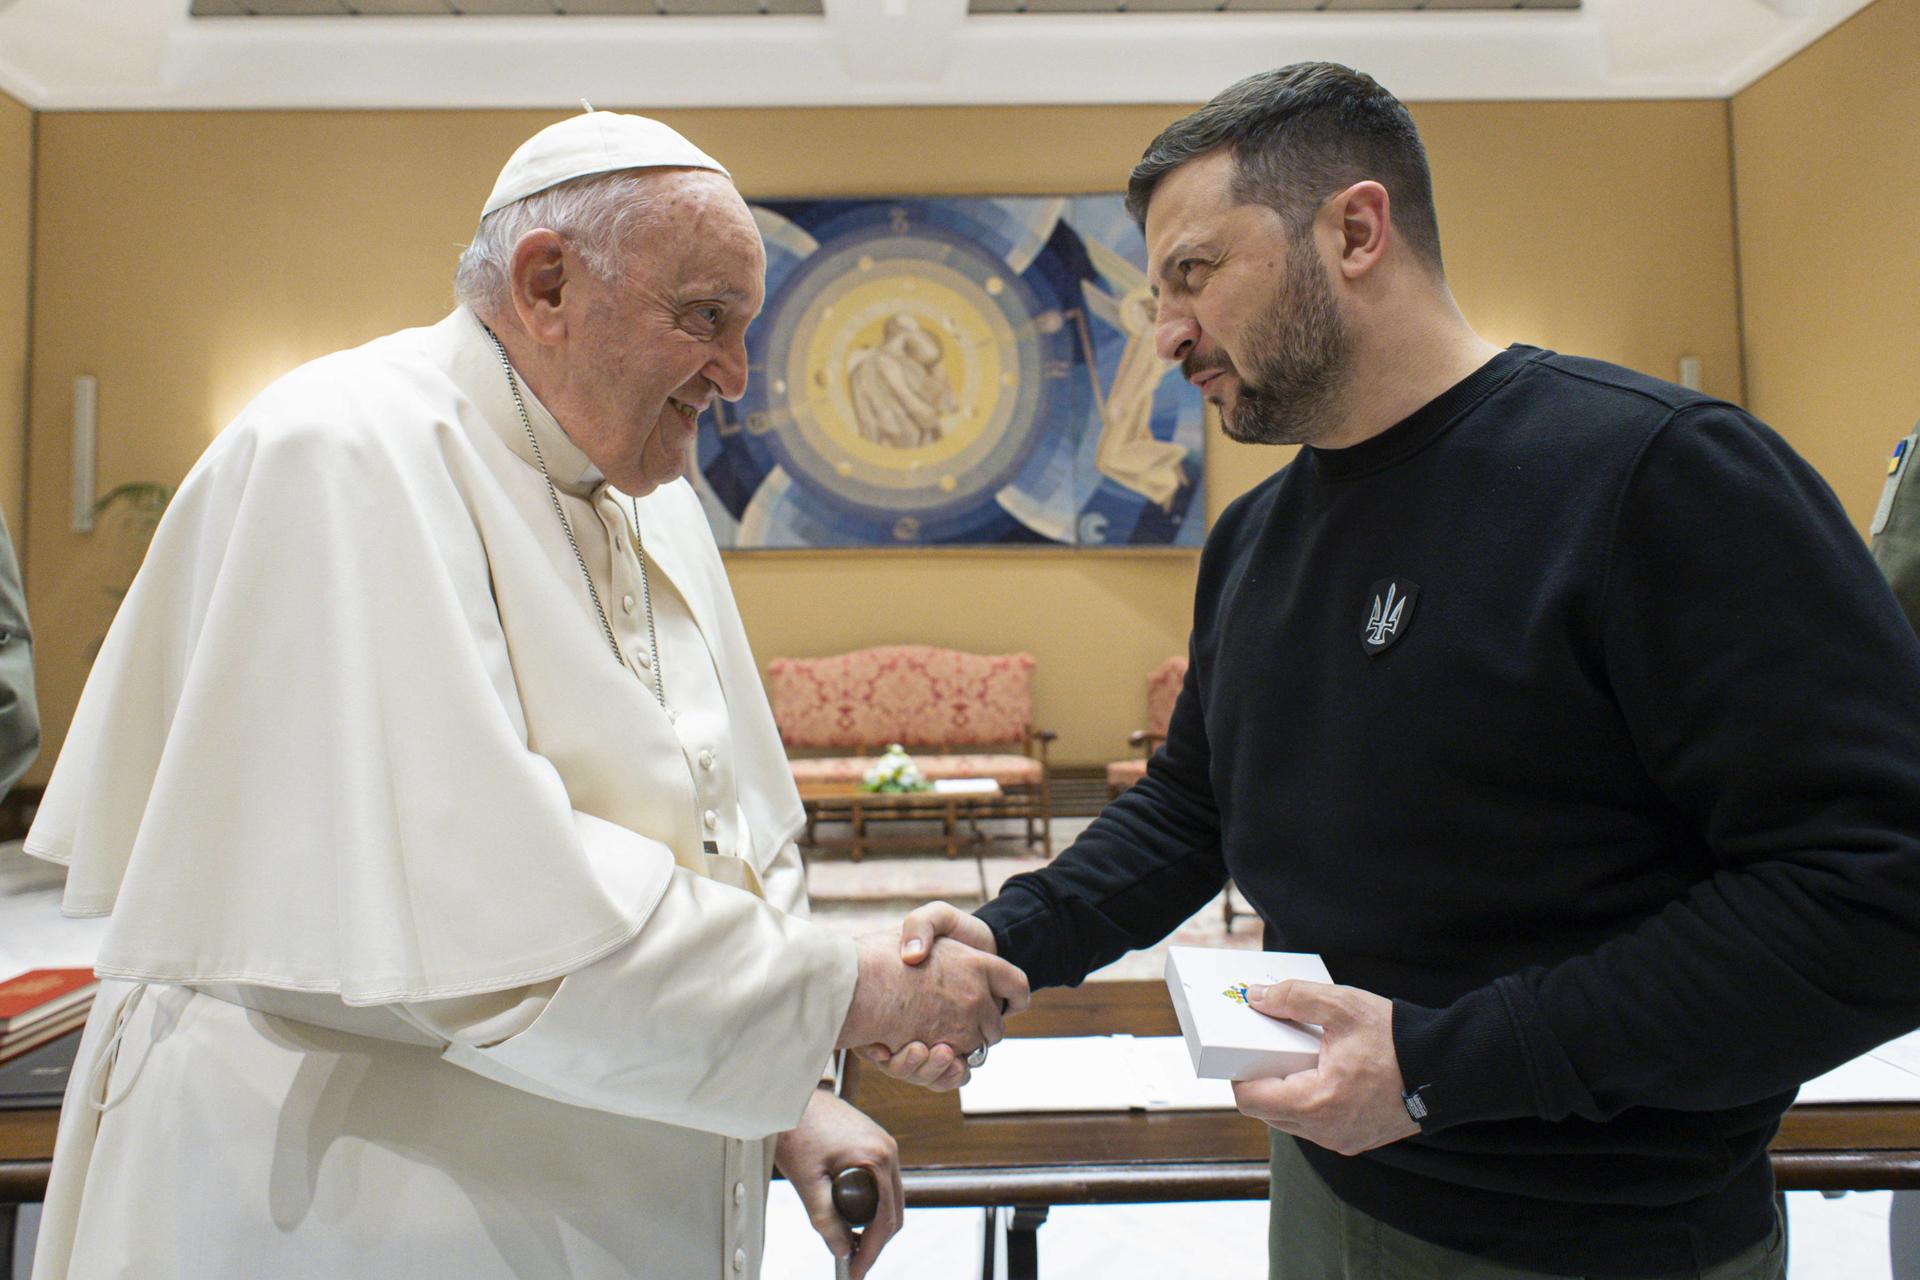 A handout picture provided by the Vatican Media shows Pope Francis (L) receiving Ukraine's President Volodymyr Zelensky during their meeting at the Vatican, 13 May 2023. EFE-EPA/VATICAN MEDIA HANDOUT HANDOUT EDITORIAL USE ONLY/NO SALES